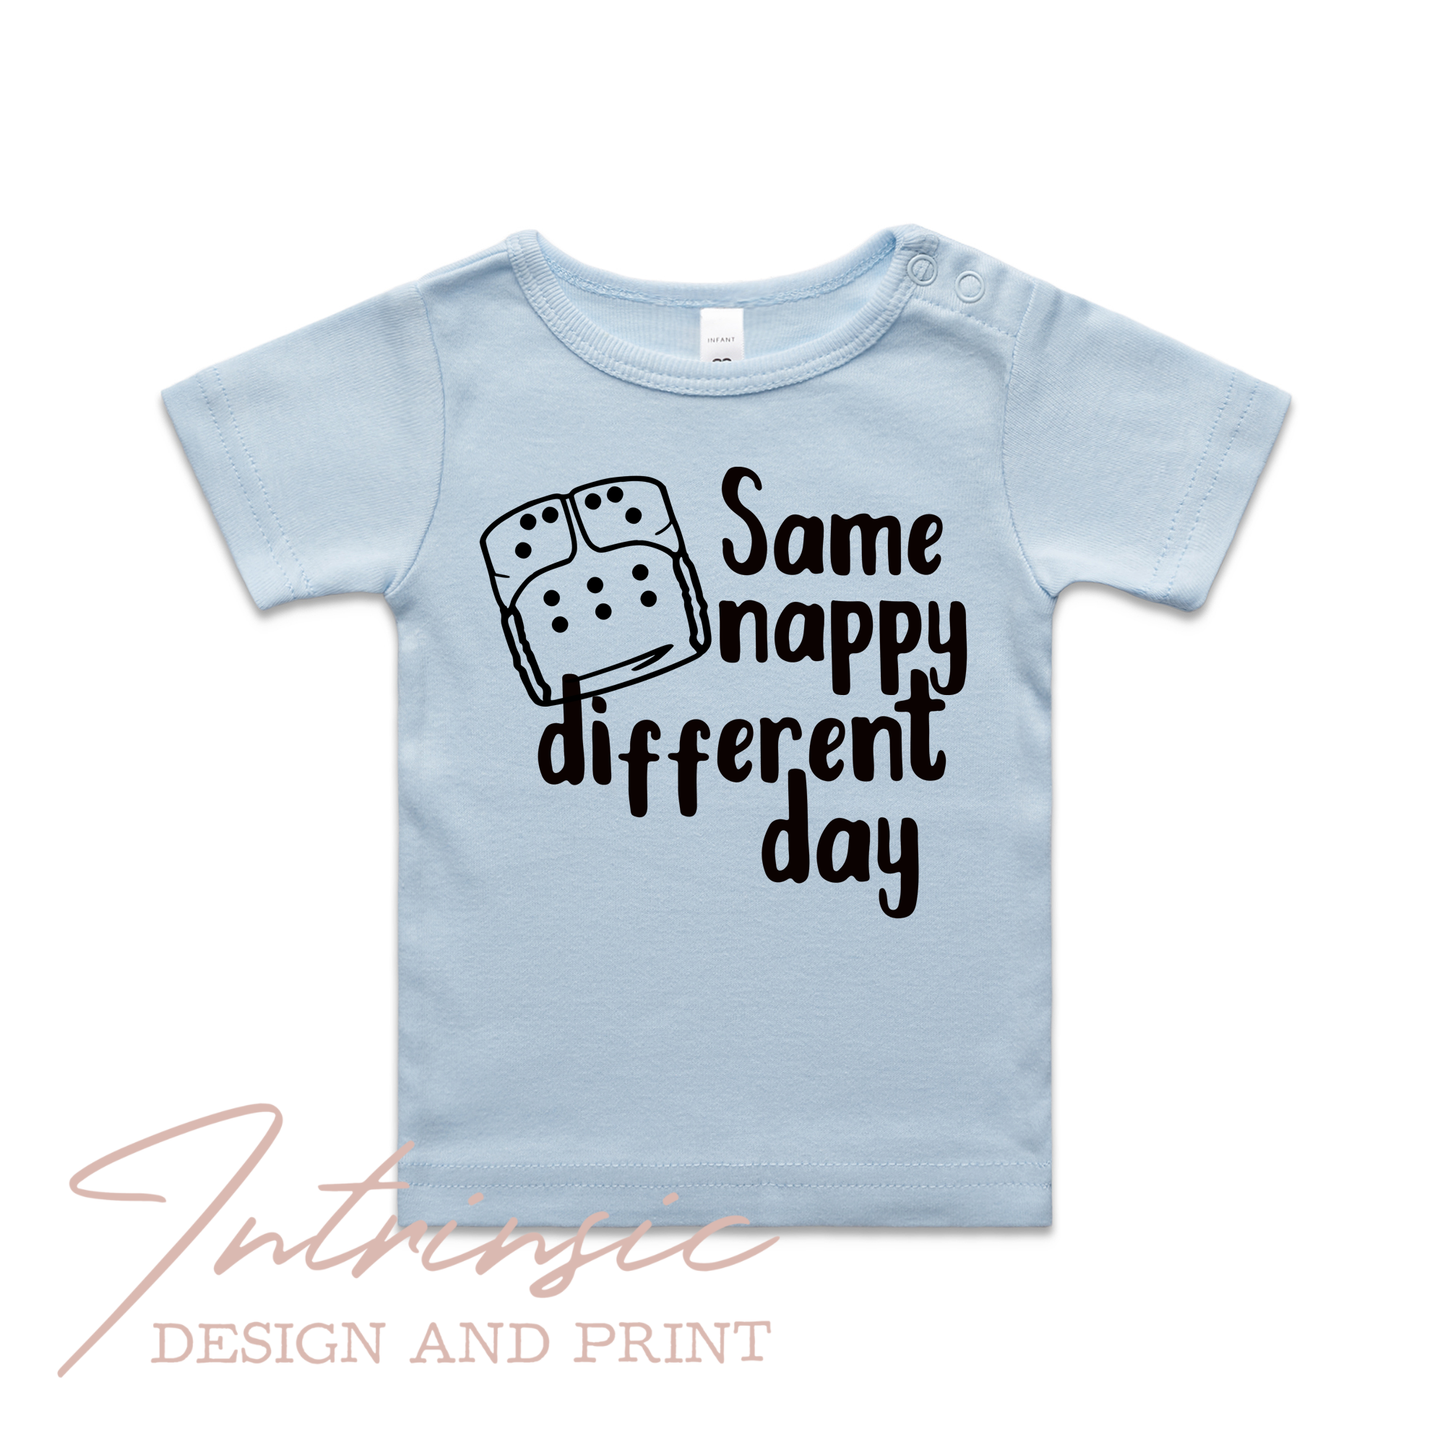 Same Nappy different day kids tee